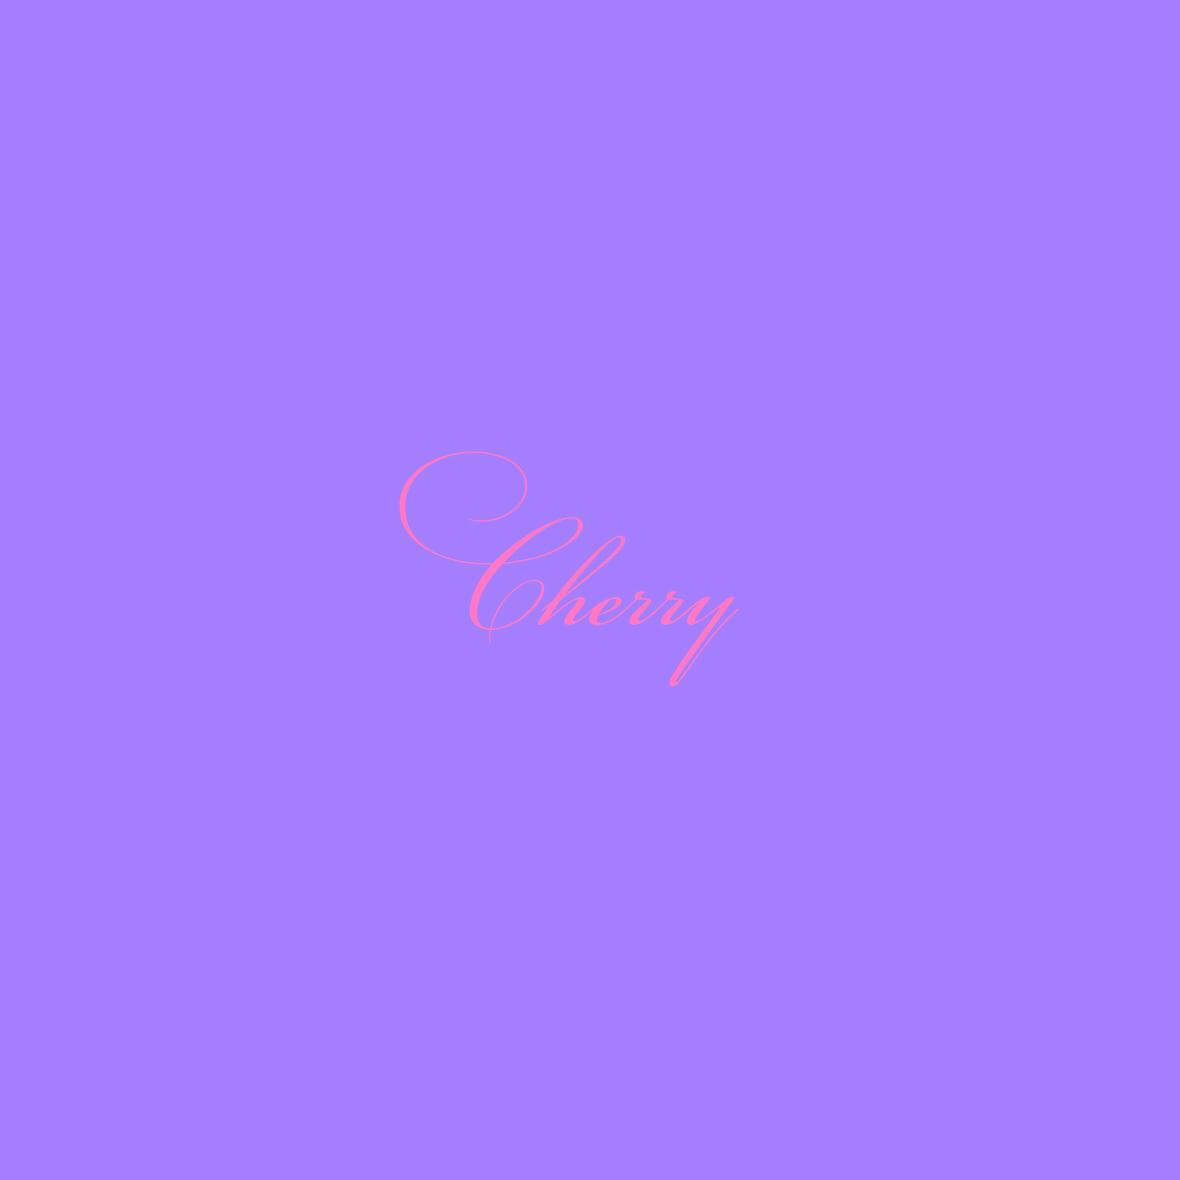 Daphni aka Caribou announces 'Cherry' Album. Along with the news, the artist has also shared the lead single "Cloudy"